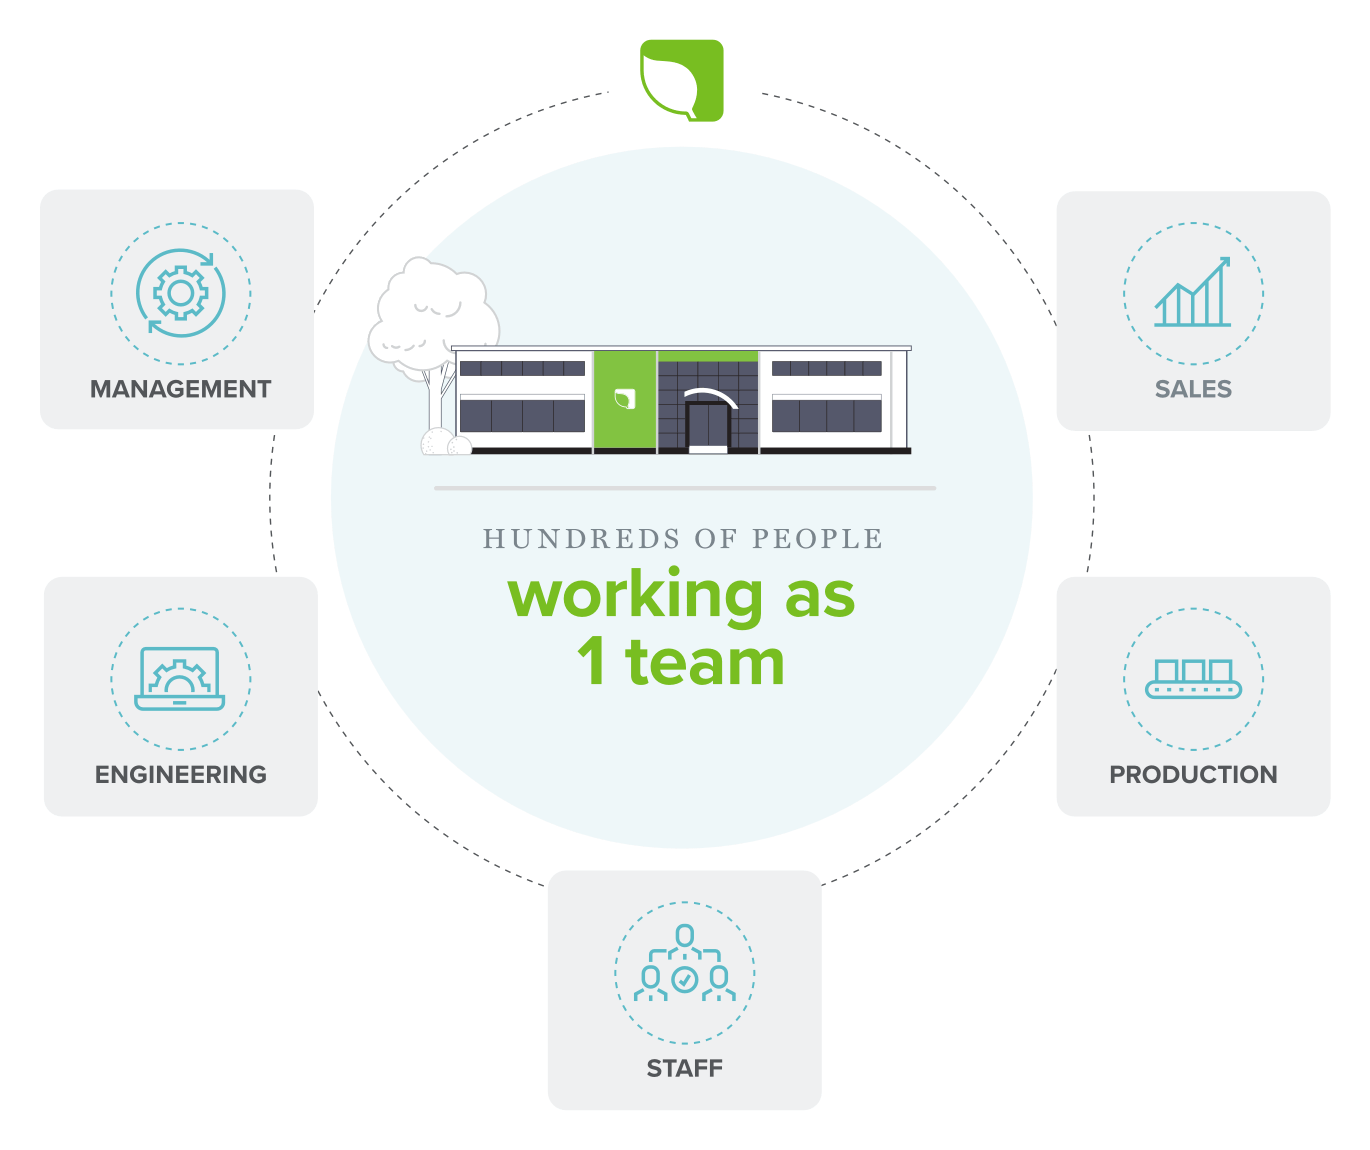 An infographic showing the teams that work together at Genesis Products